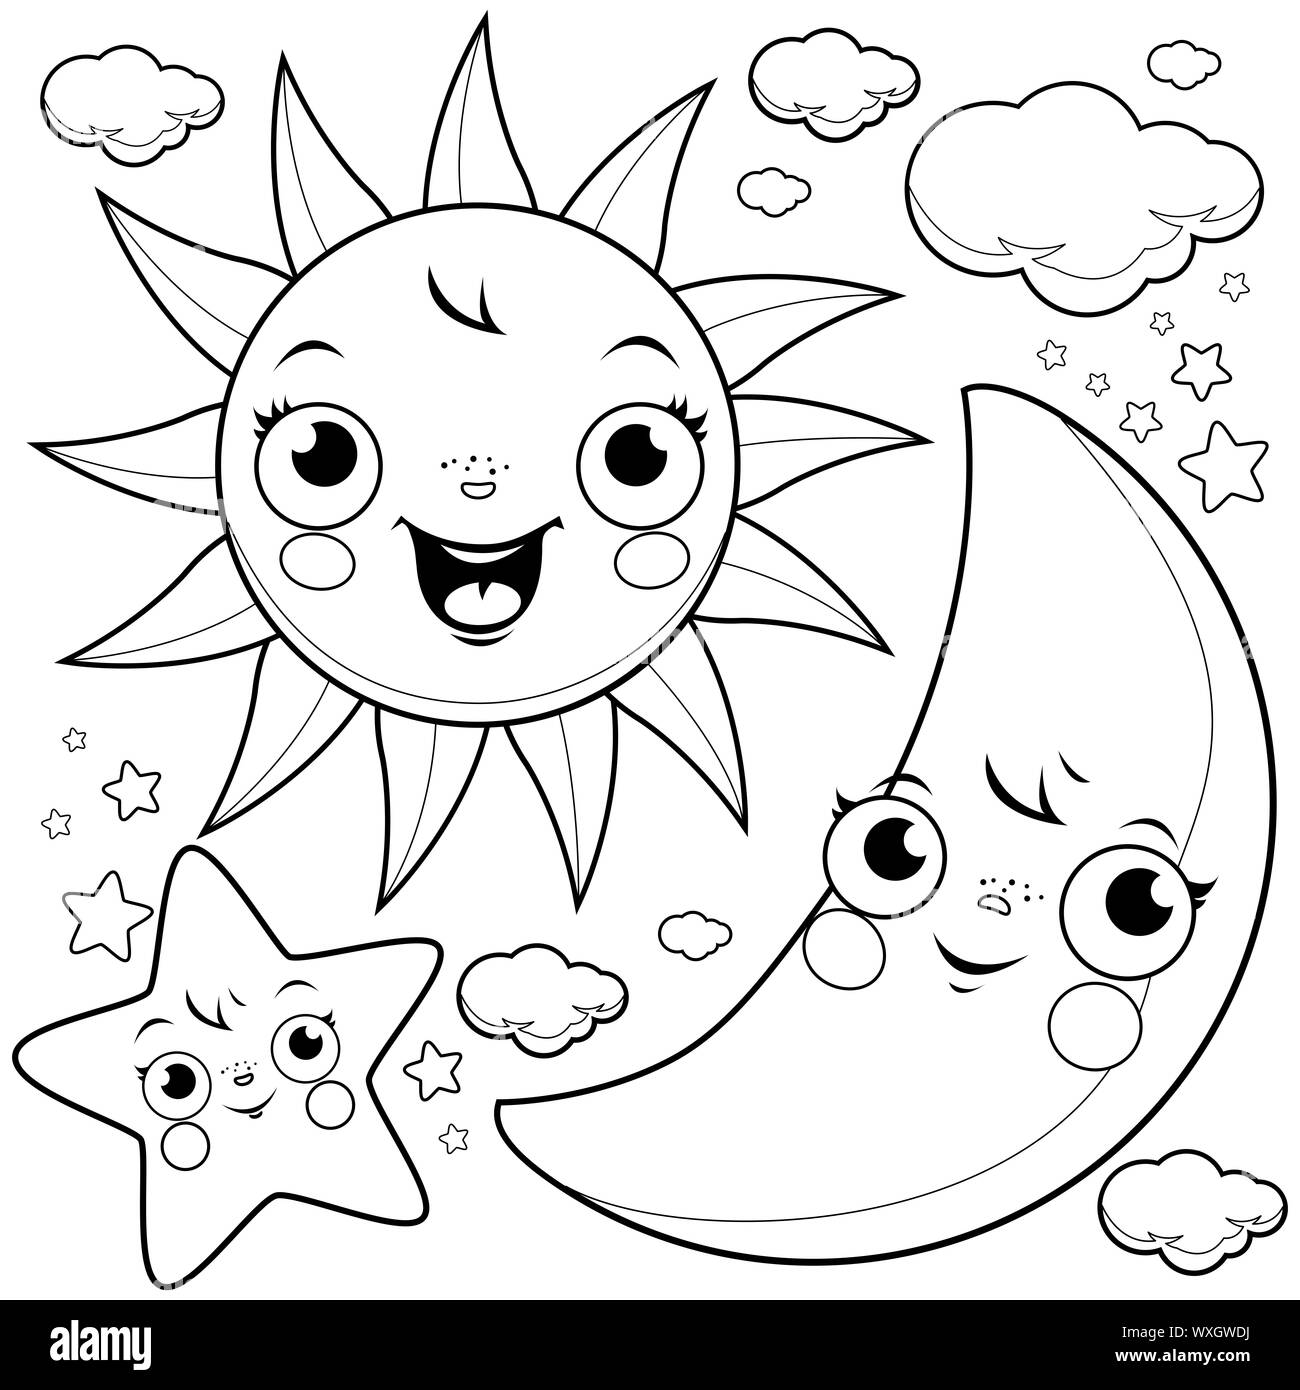 Cute sun, moon, stars and clouds. Black and white coloring page illustration Stock Photo